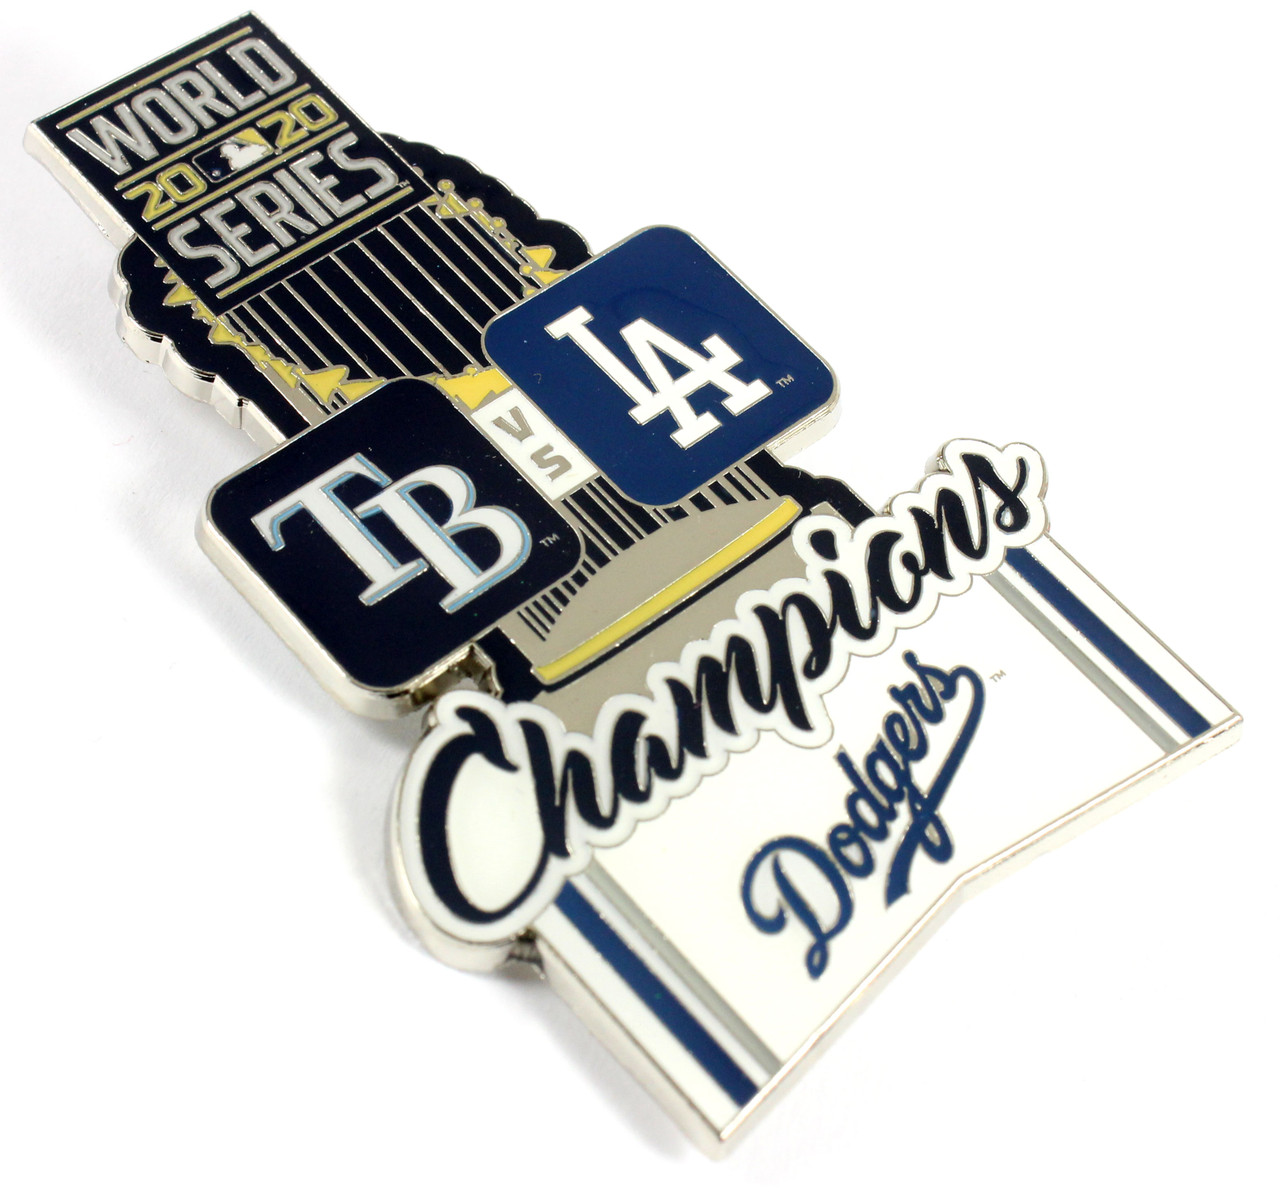 Los Angeles Dodgers 2020 World Series Champs 3 Grande Pin (Ships 11/27)